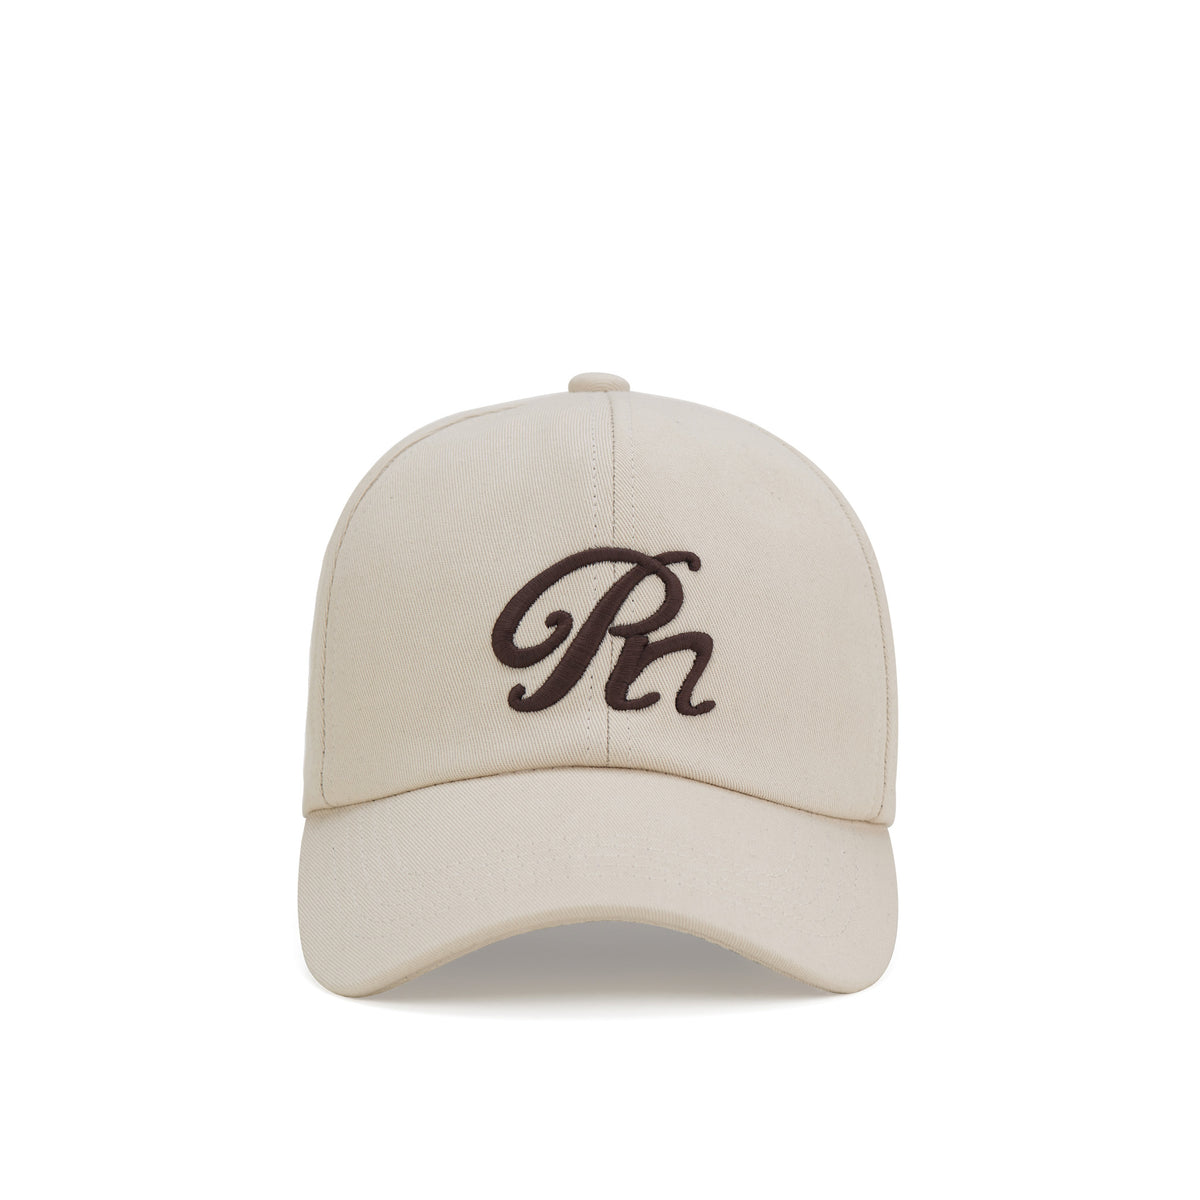 Rollie Nation Cap Oatmeal